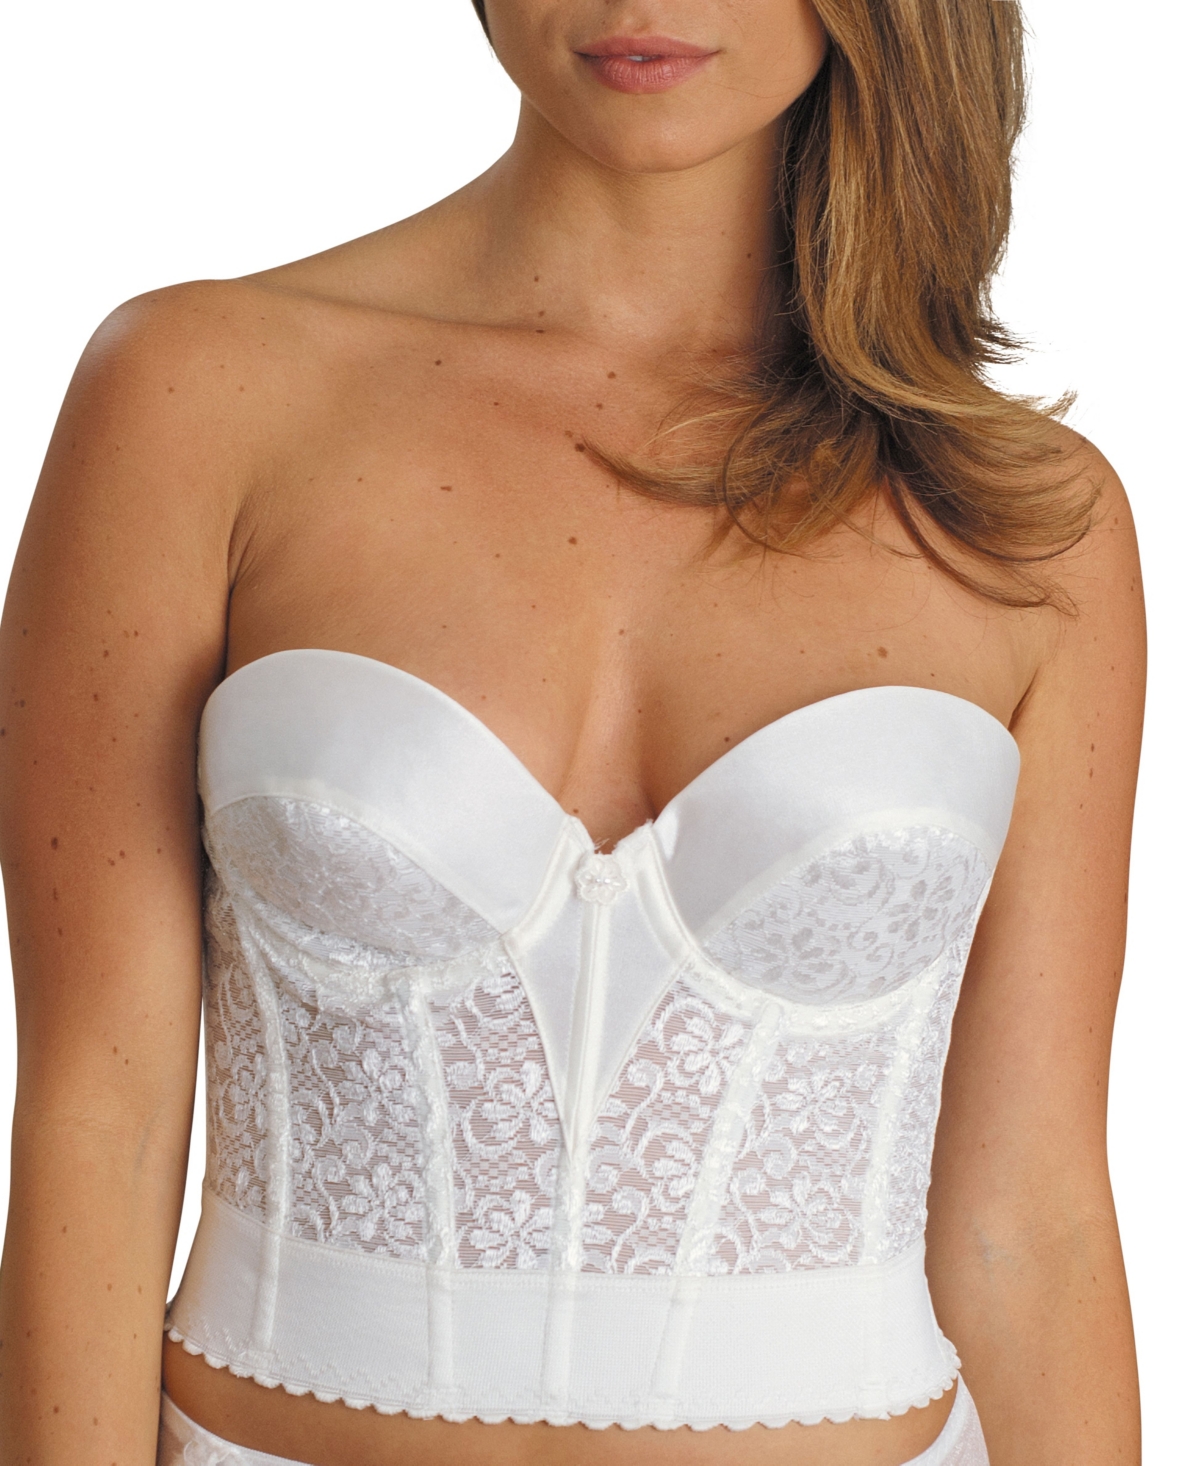 Carnival Womens Seamless Molded Longline Bra, Ivory, 38C at